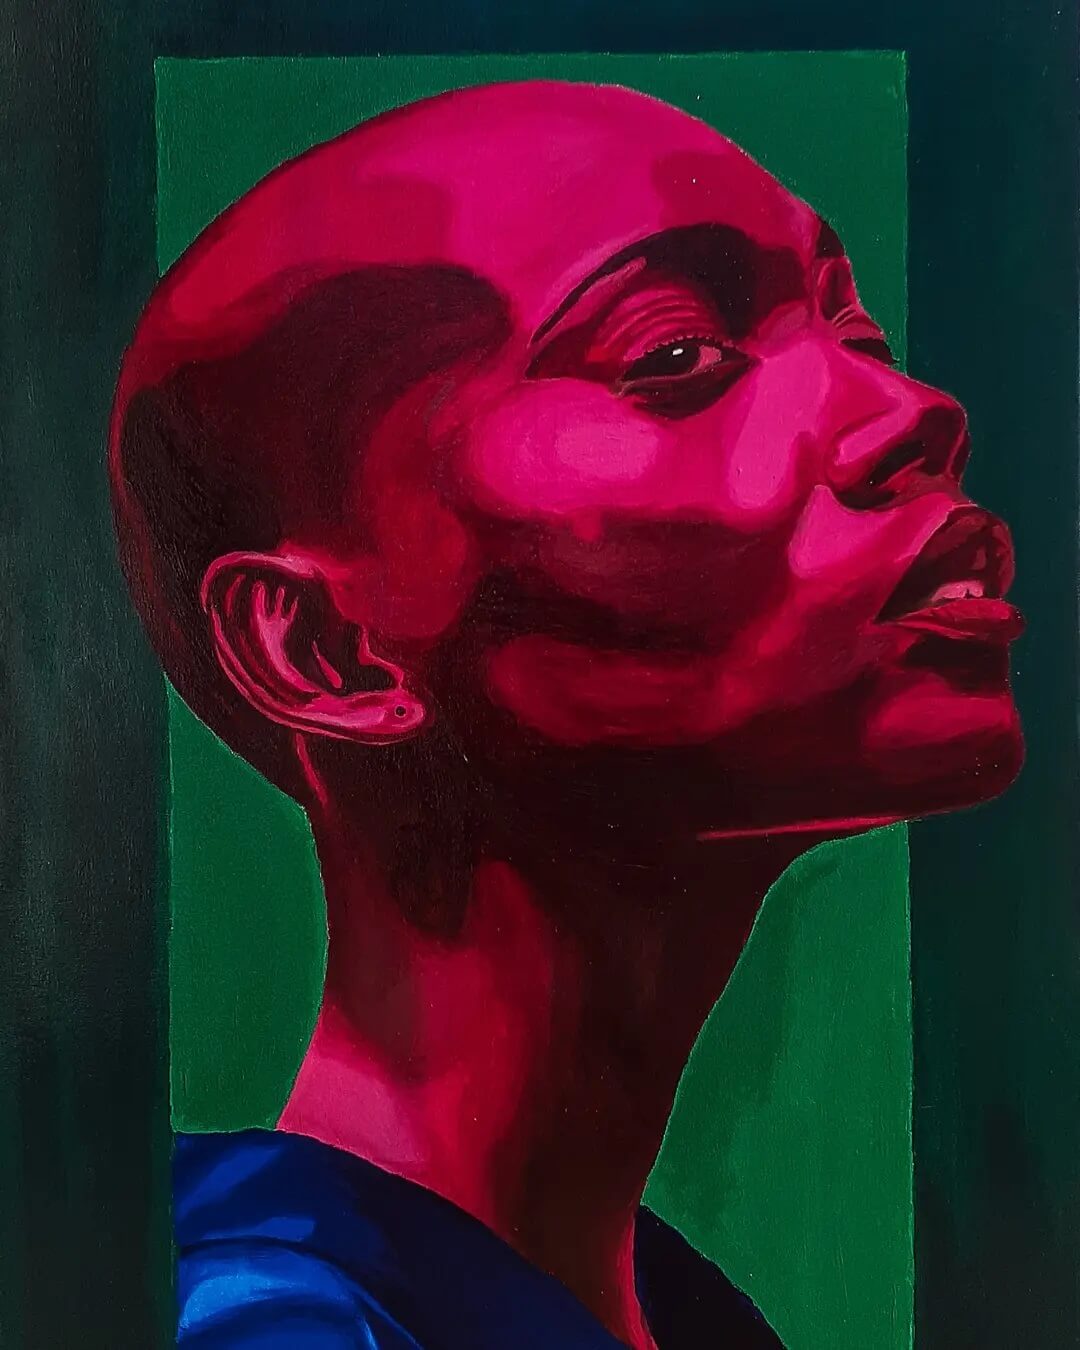 A bright oil painting portrait of a person's face with a green background.